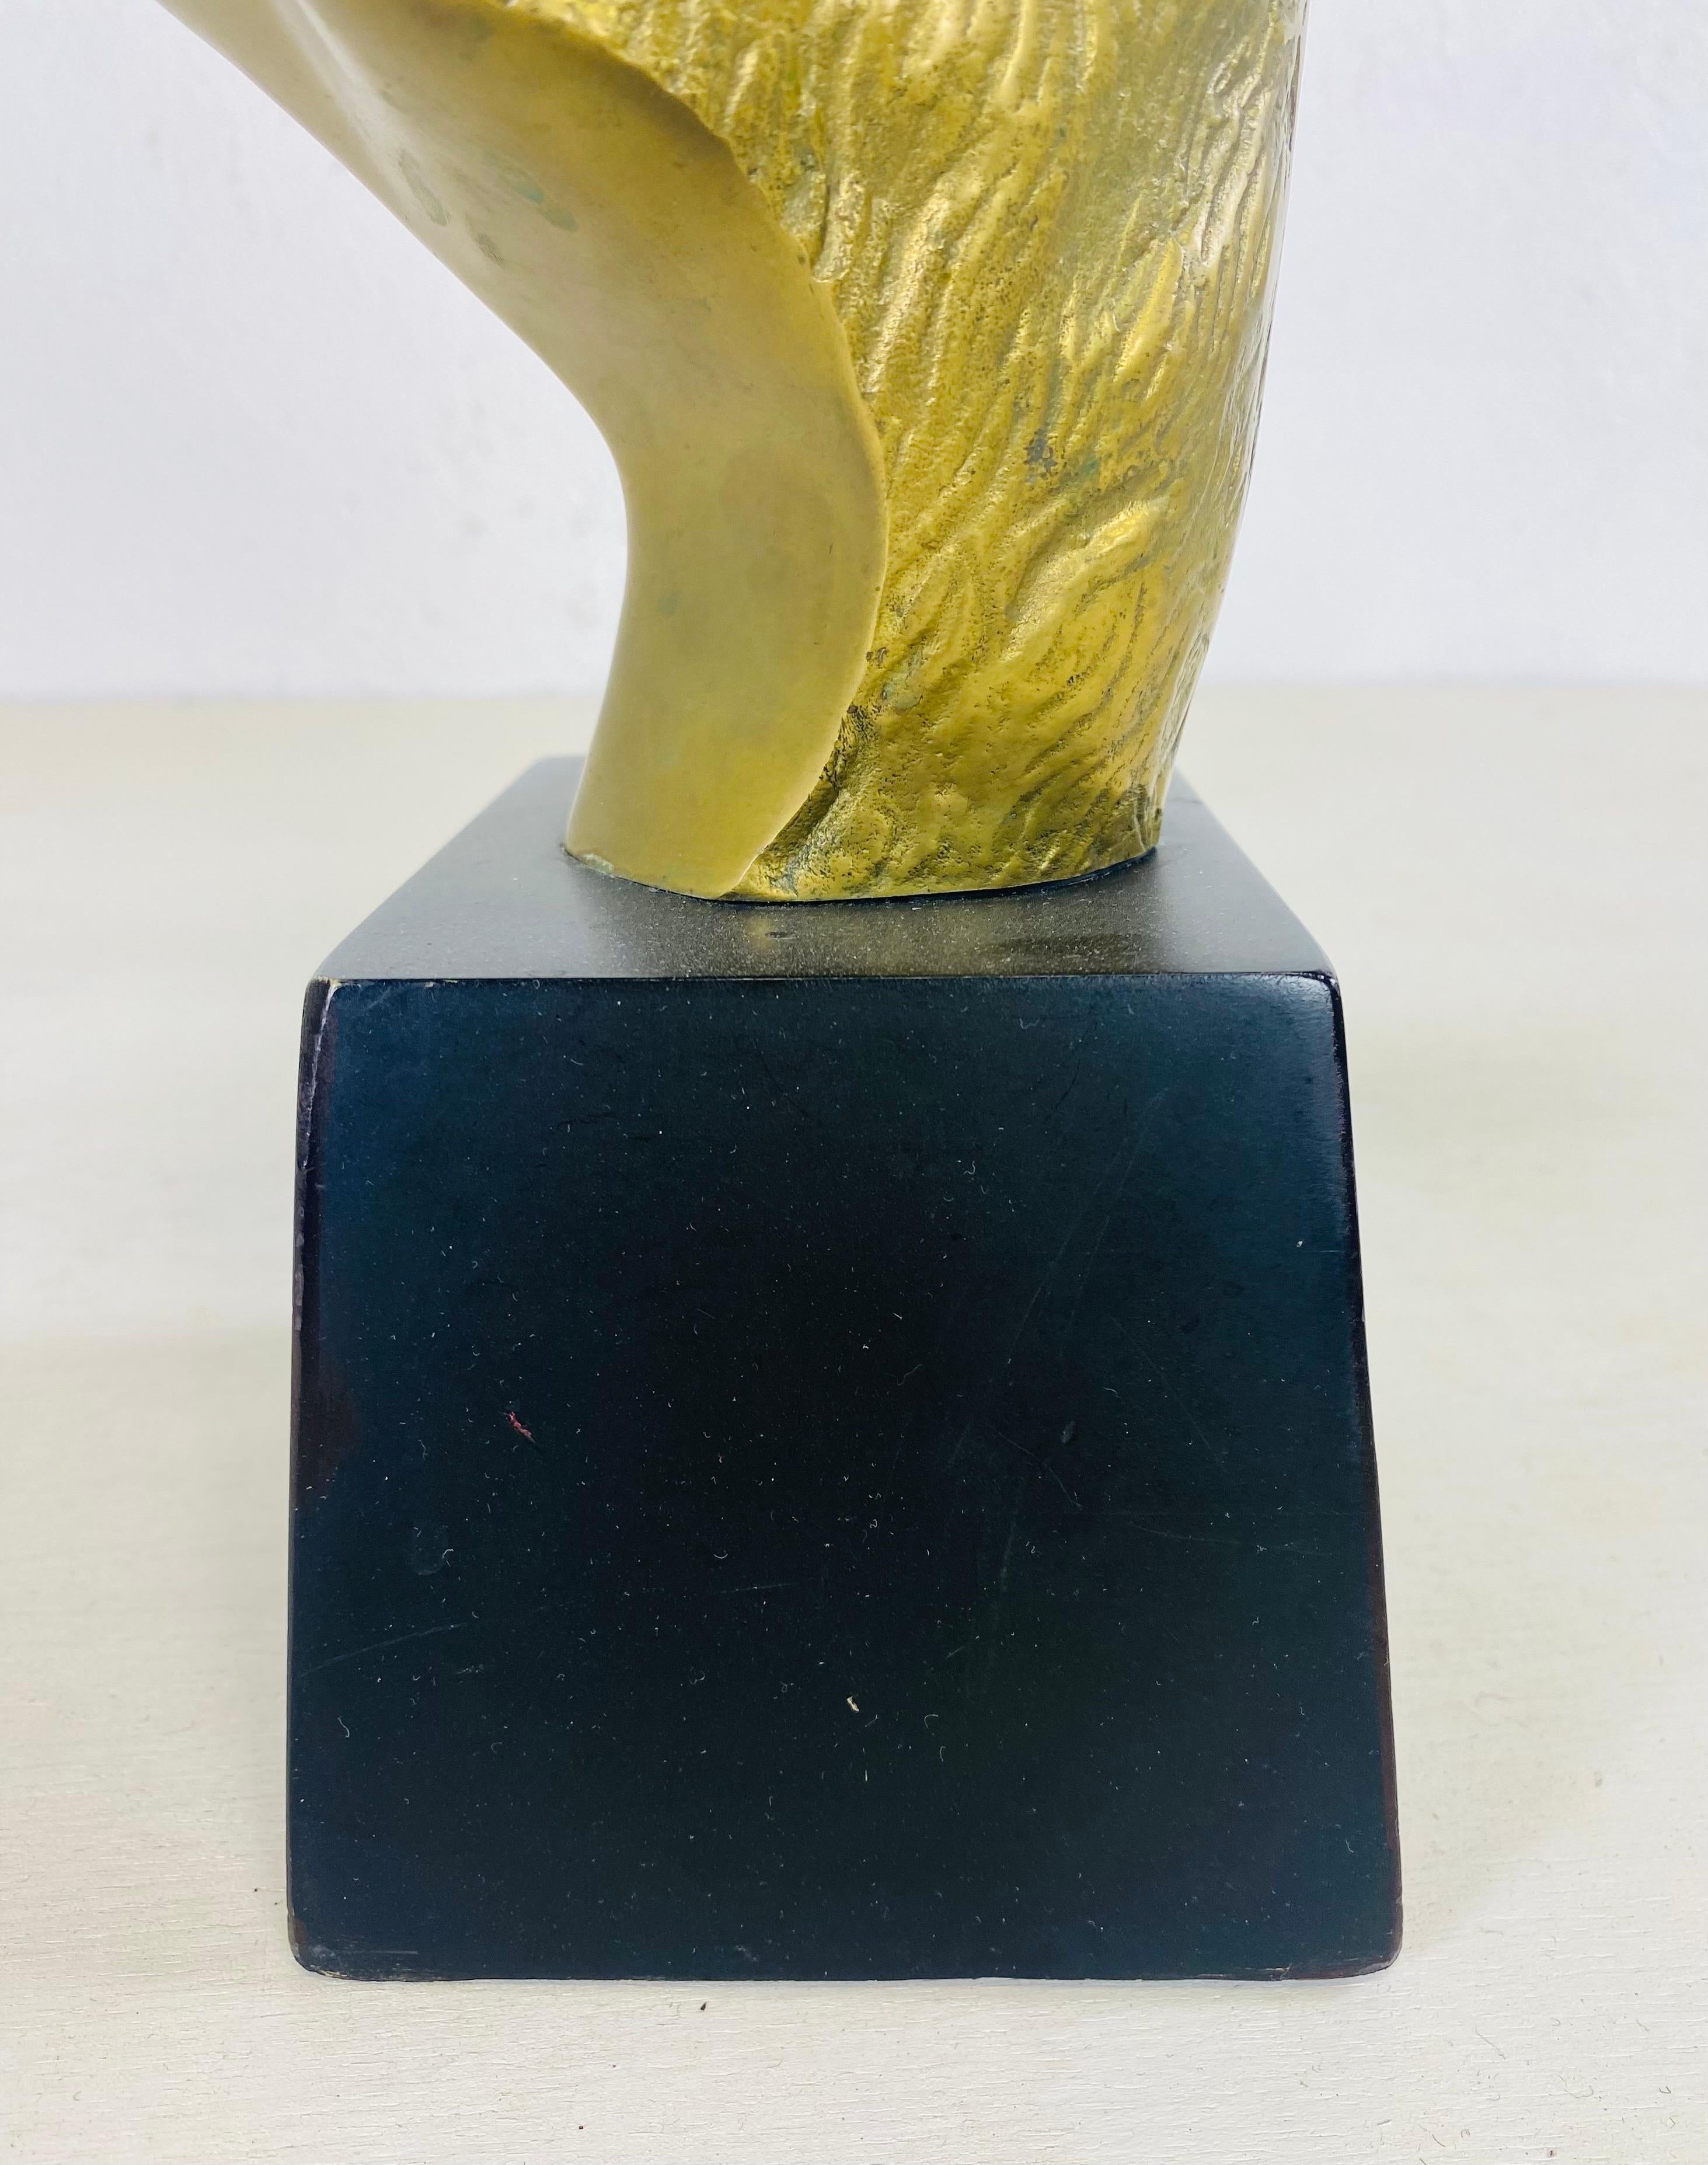 This is a midcentury vintage solid brass bust of a Ramshead. This large Ramshead is hand Chased and Stands on a black wooden pedestal. This Ramshead sculpture it was made in America circa 1978.